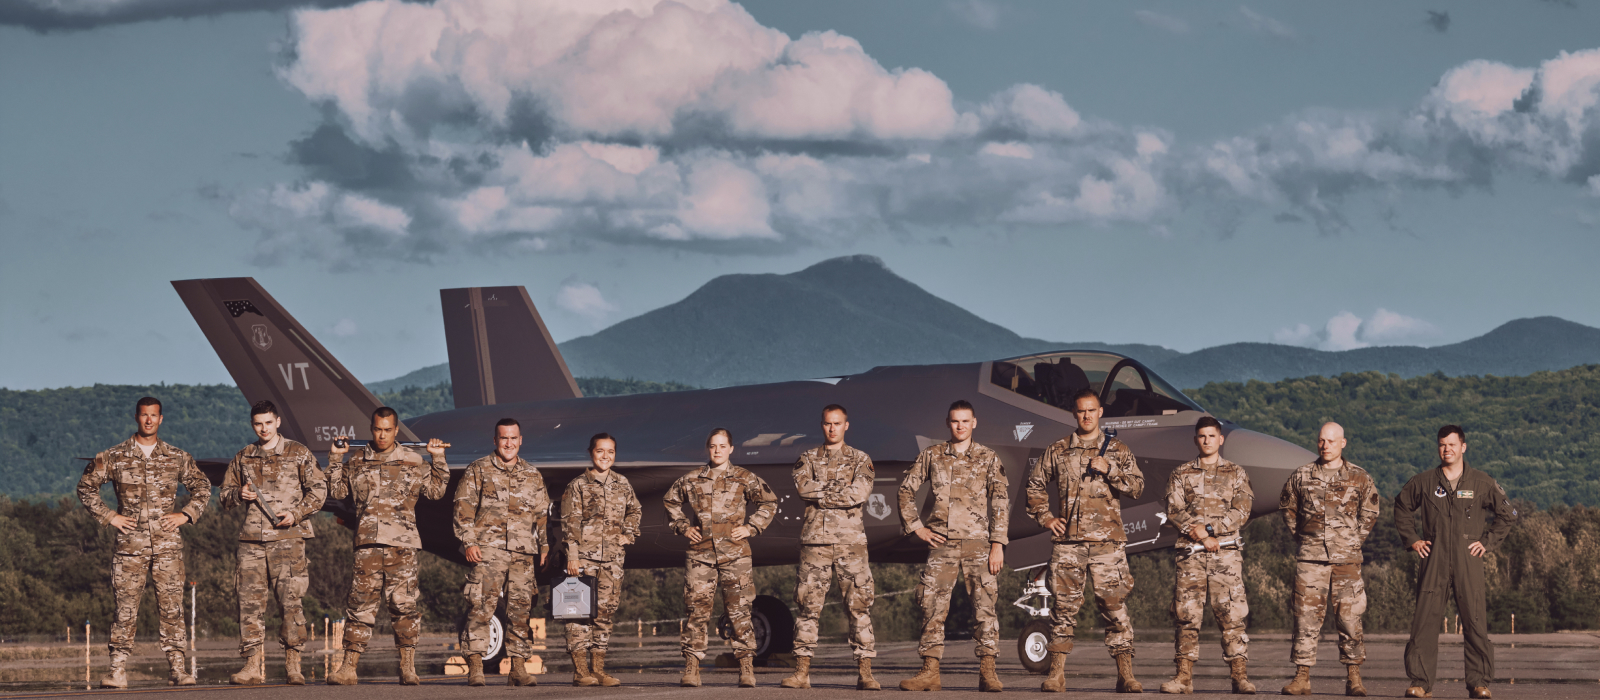 Airmen in front of an airplane in front of a volcano